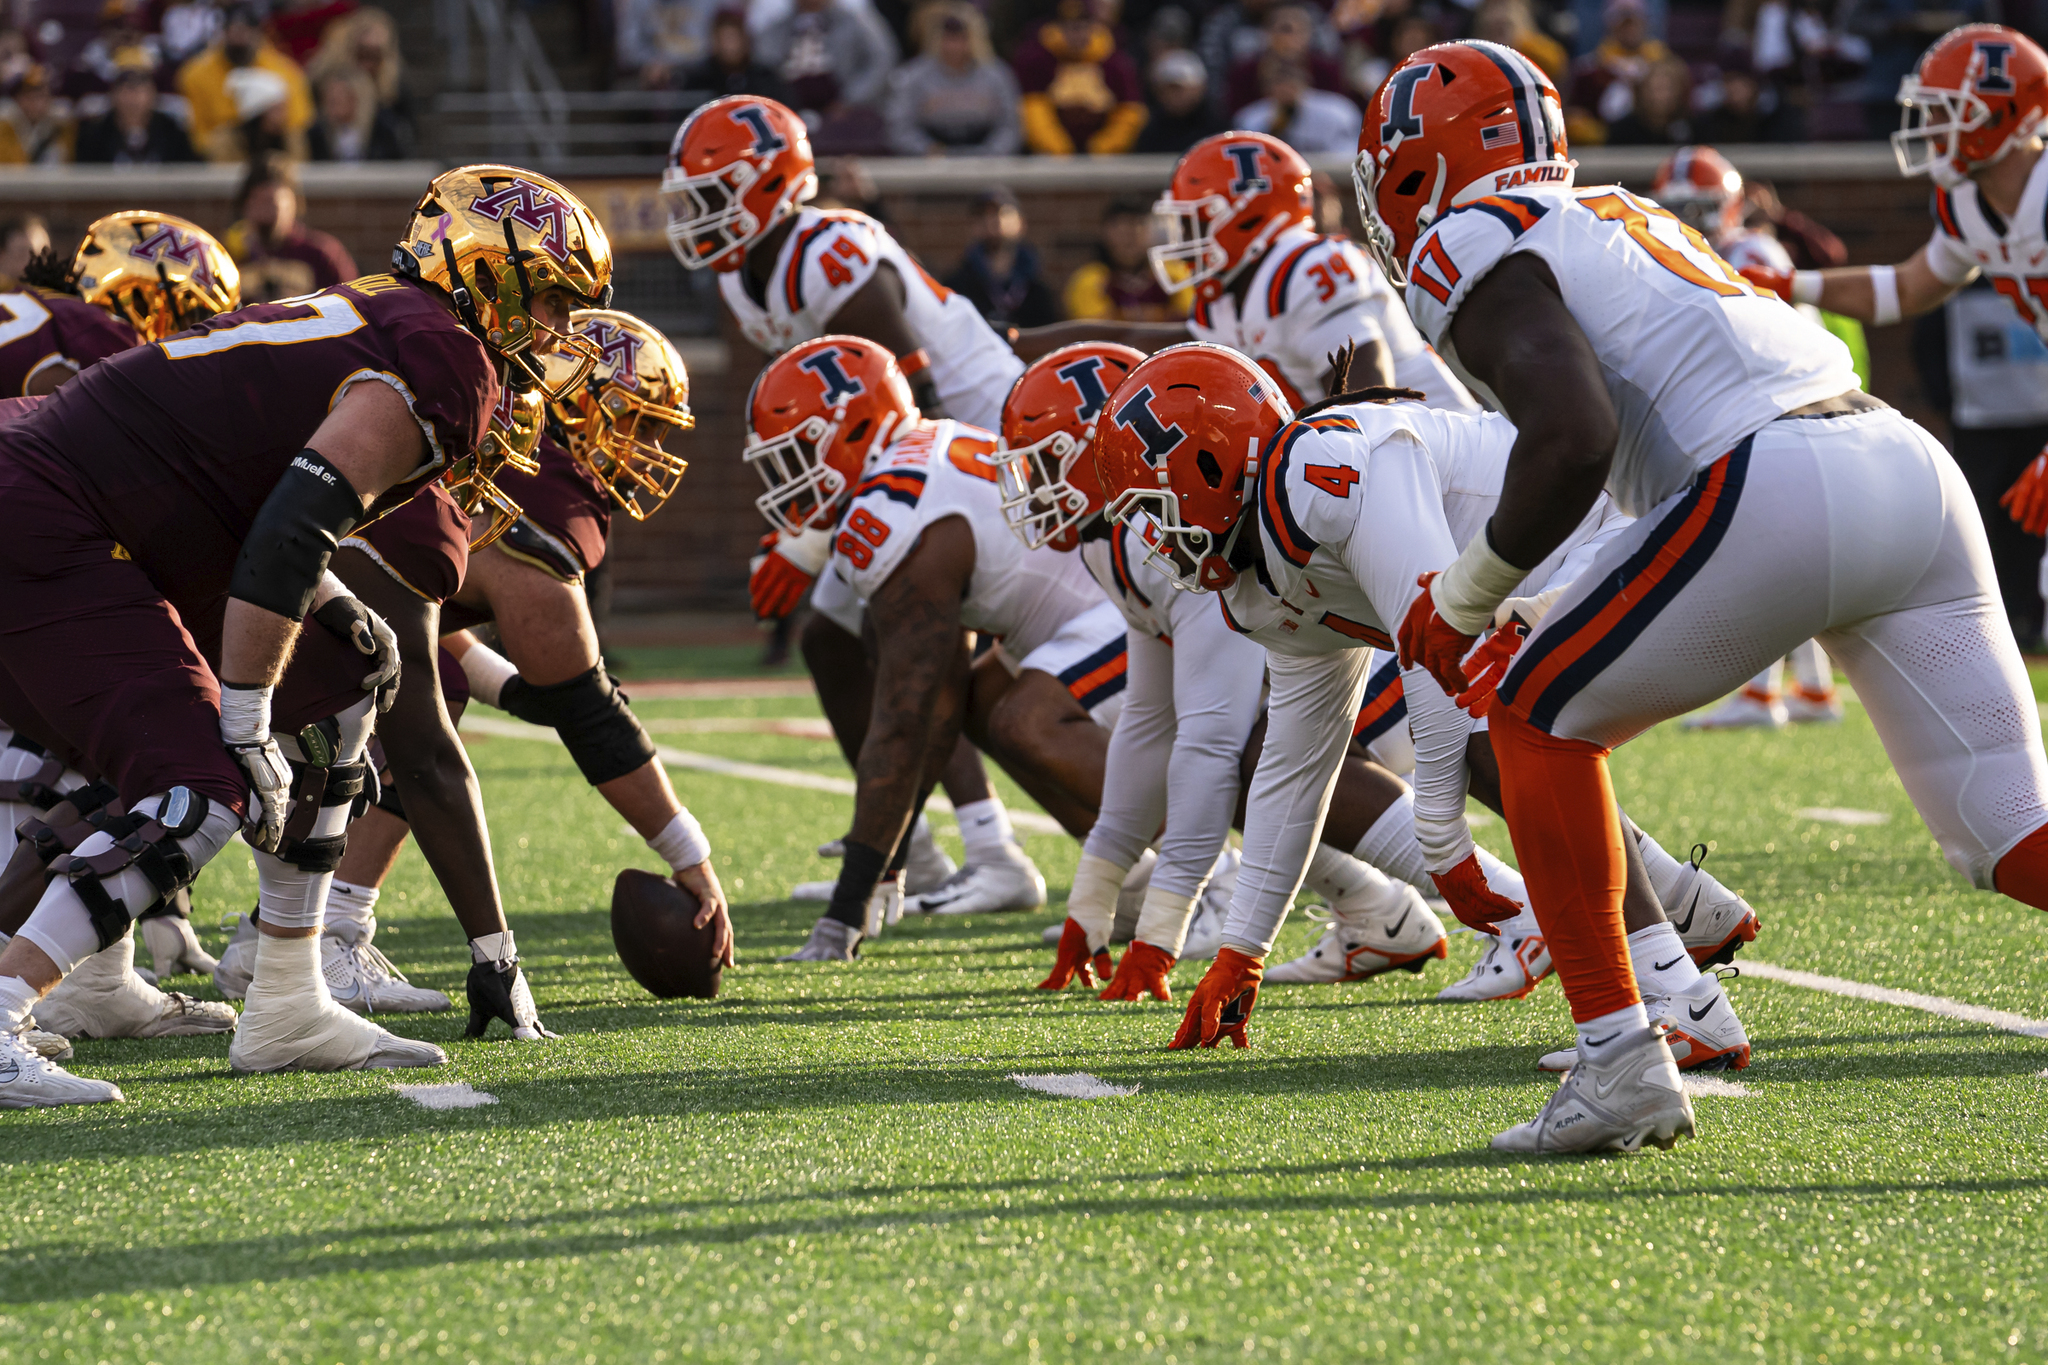 The Trench Report: Minnesota